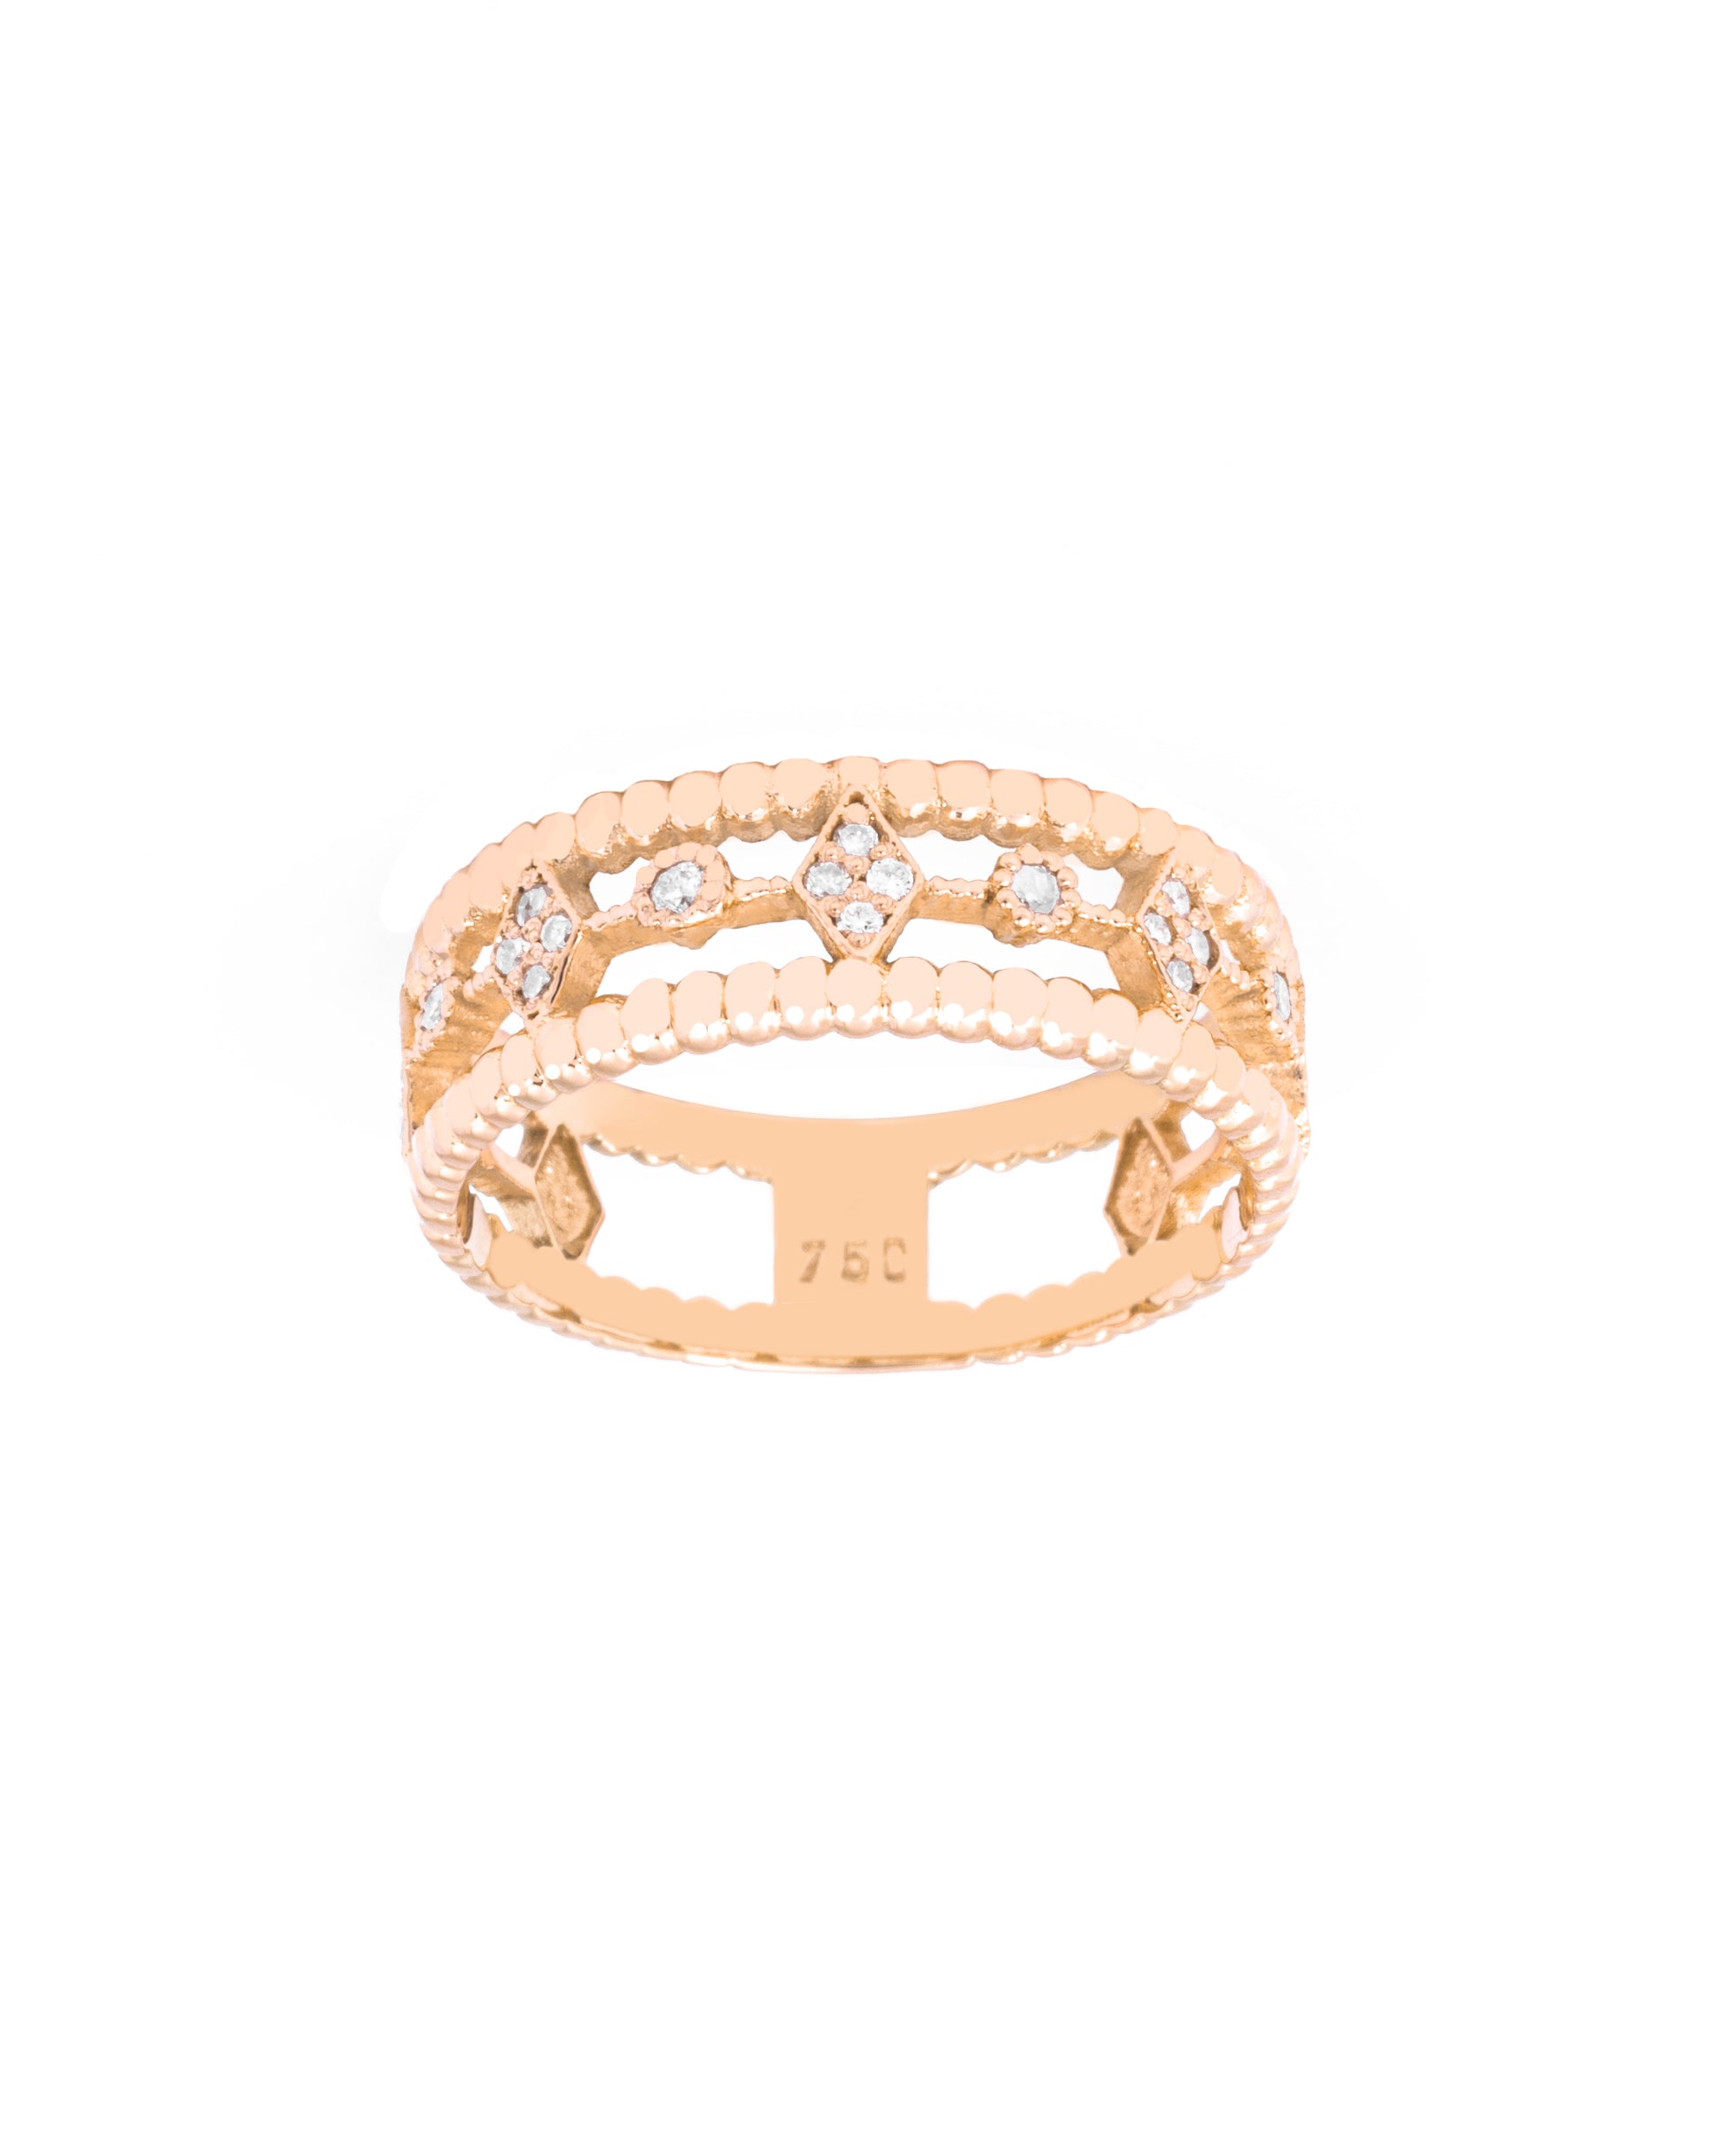 Ring, 3 Rounds GRIFF Jewelry Lebanese Designer – GRIFF online